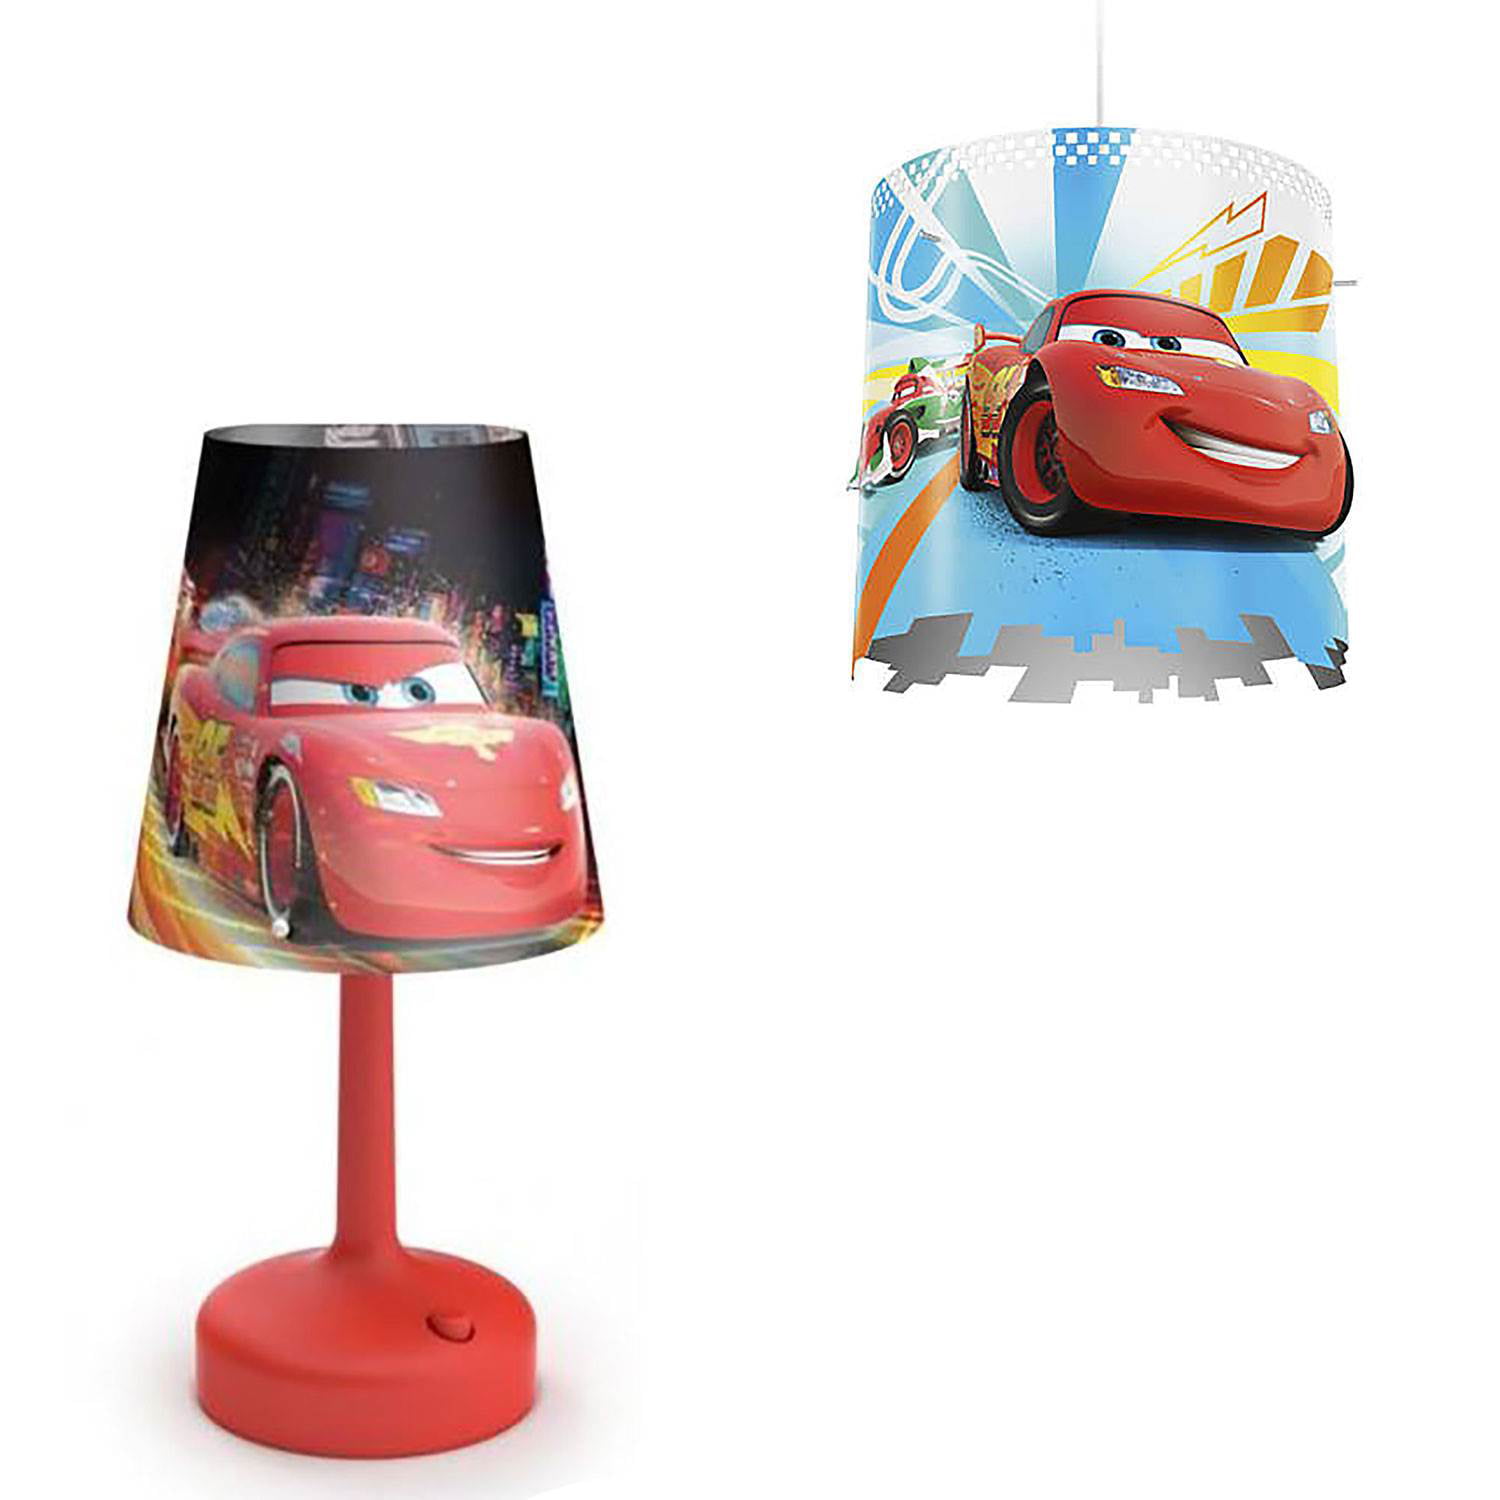 CEILING LIGHT SHADE KIDS FREE P+P 106 CARS MCQUEEN MATER LAMPSHADE 